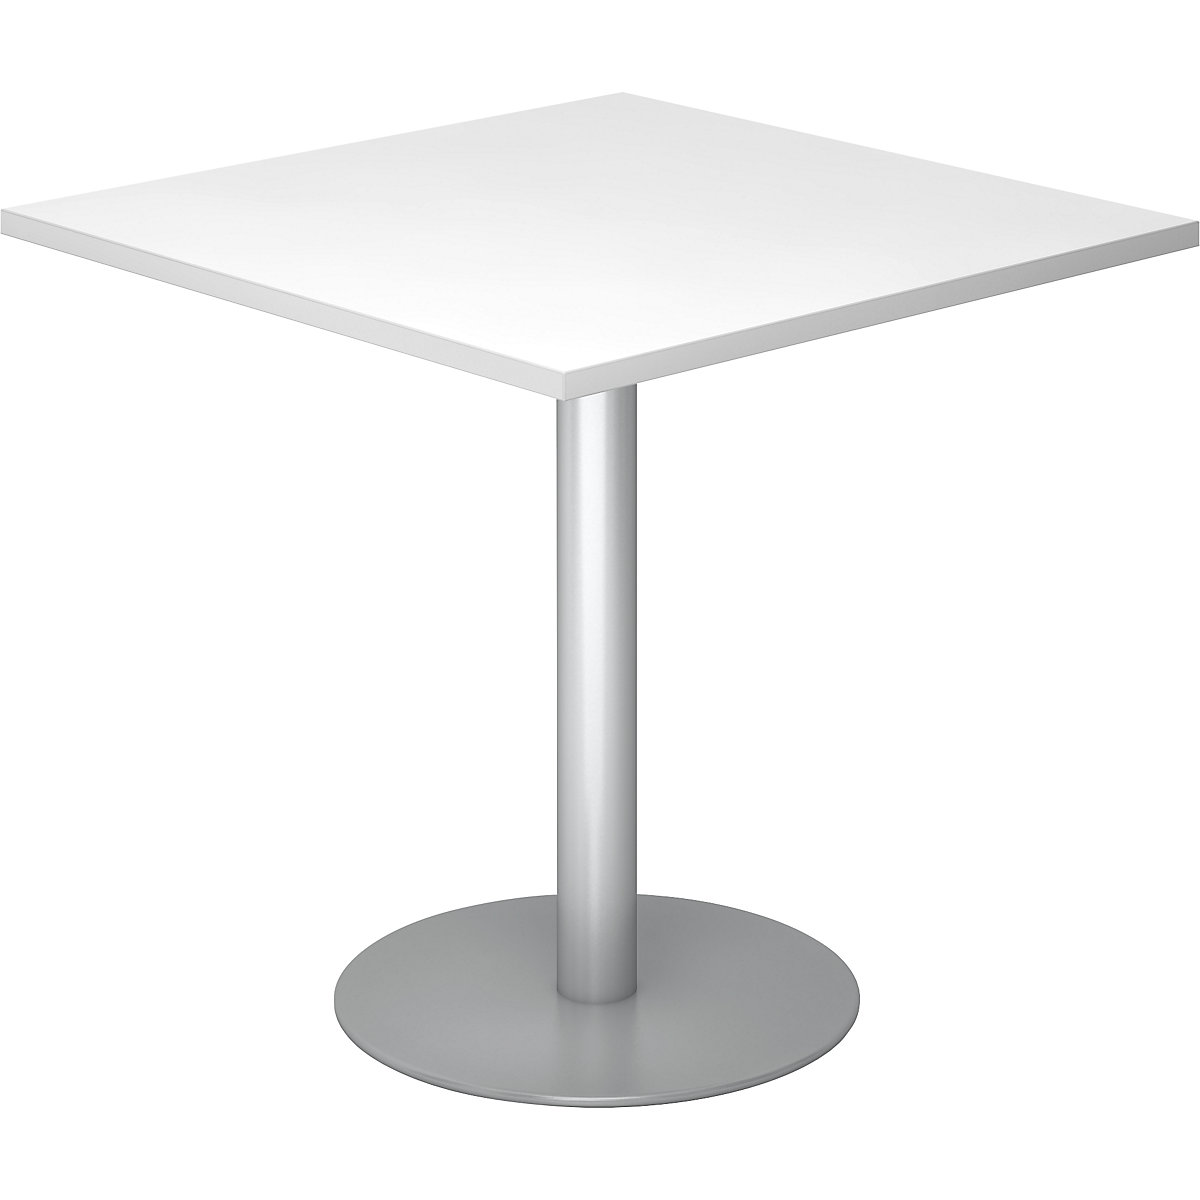 Conference table, LxW 800 x 800 mm, 755 mm high, silver frame, tabletop in white-6